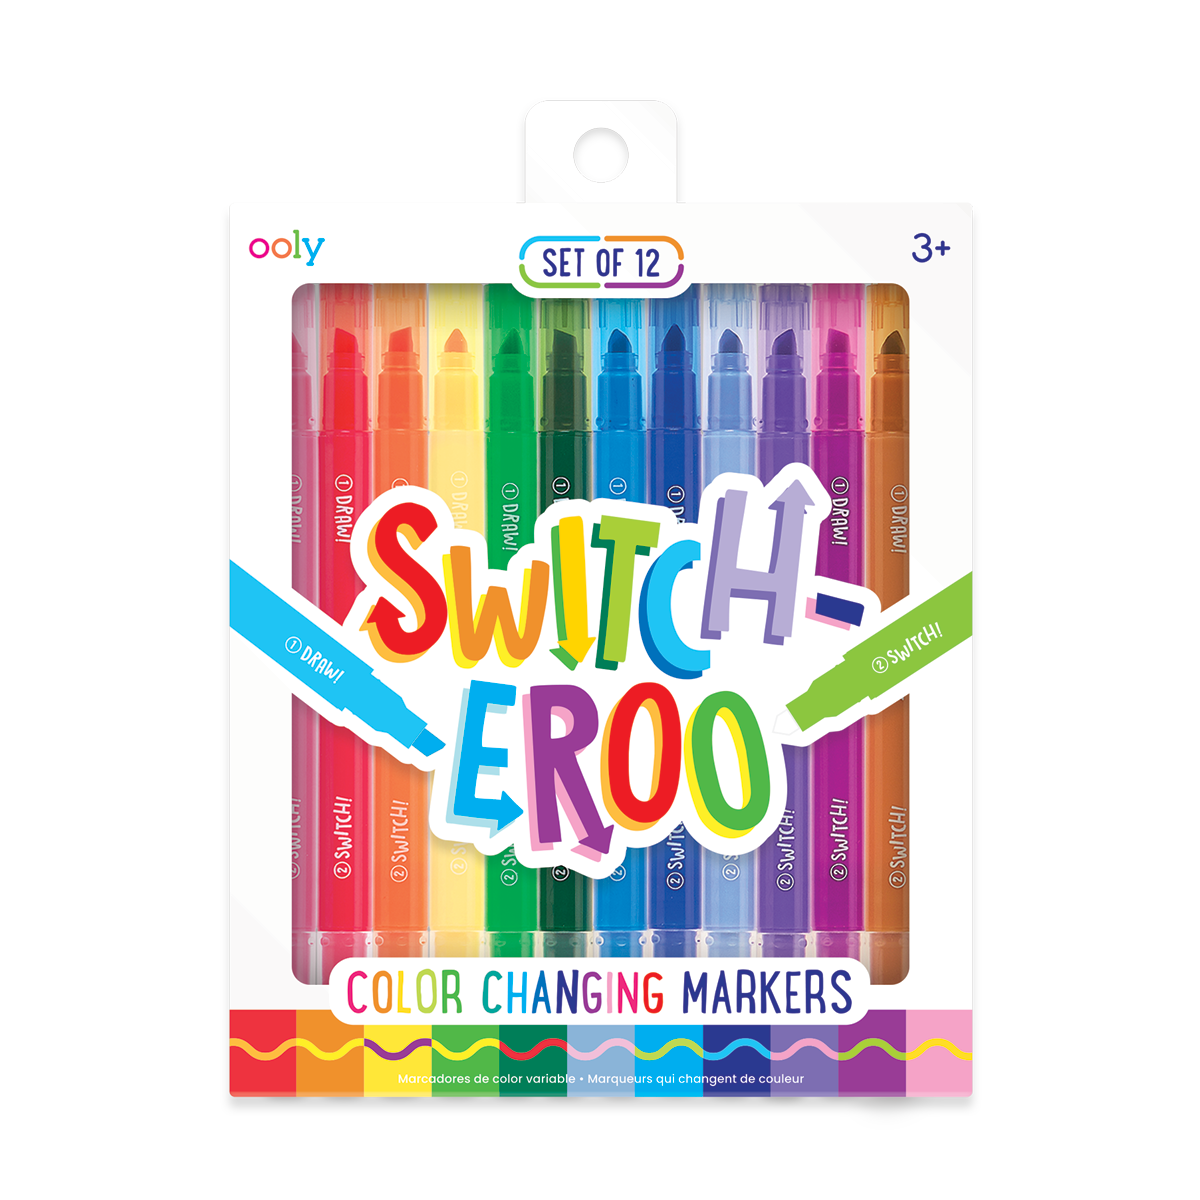 Ooly Magic Puffy Pens set of 6 from Ooly with fast shipping from $9.95